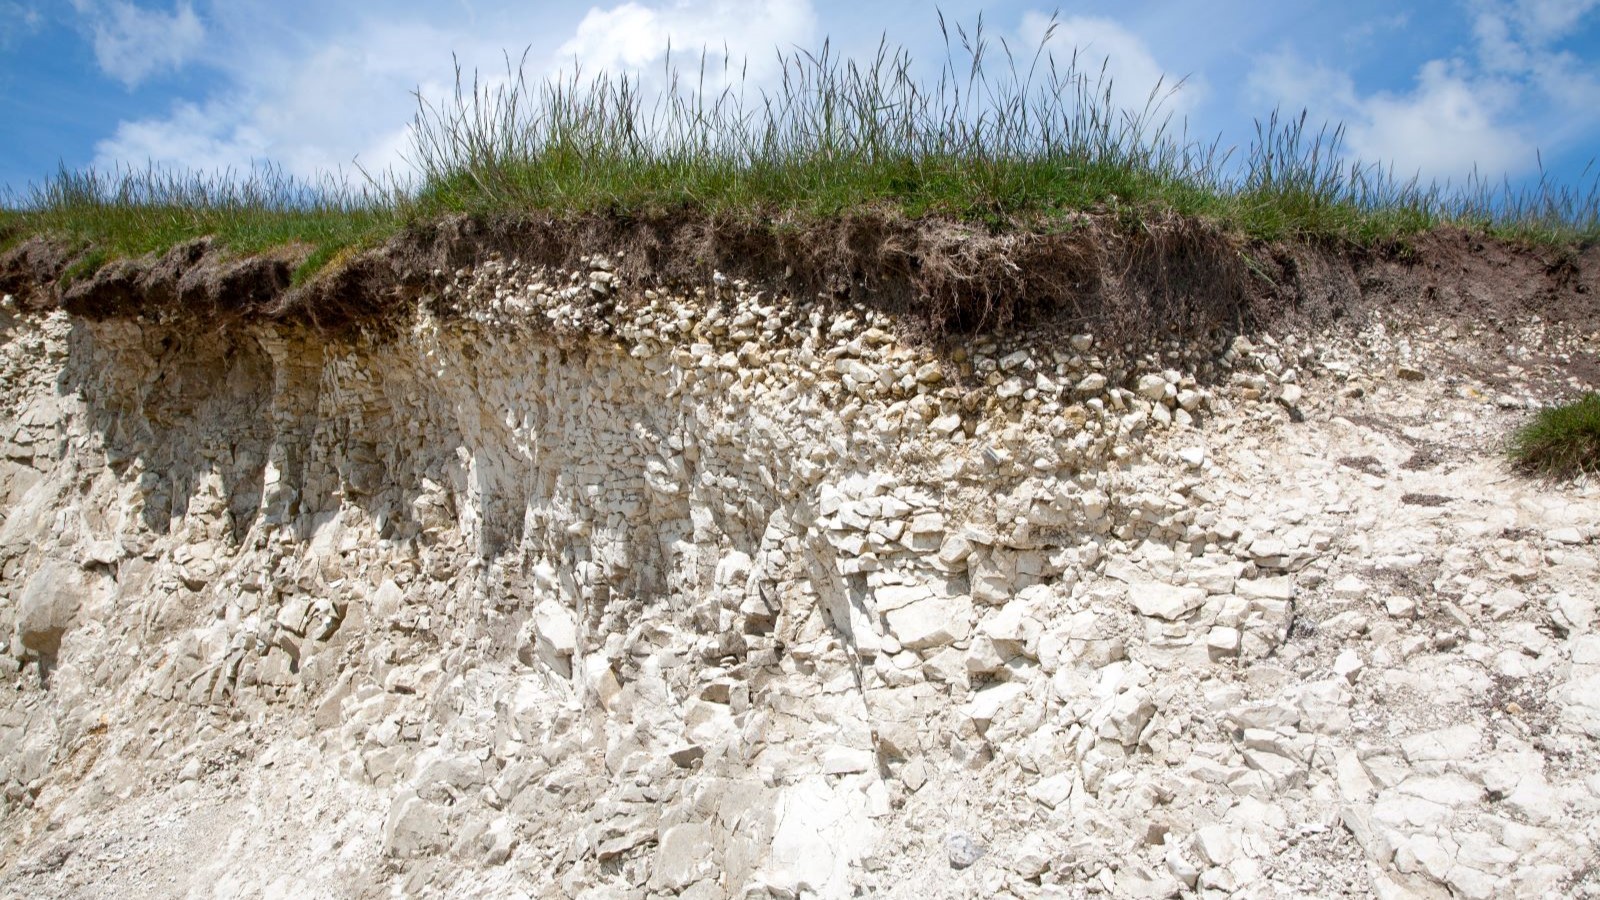 Chalk subsoil with grass on top and a blue sky in the backdrop